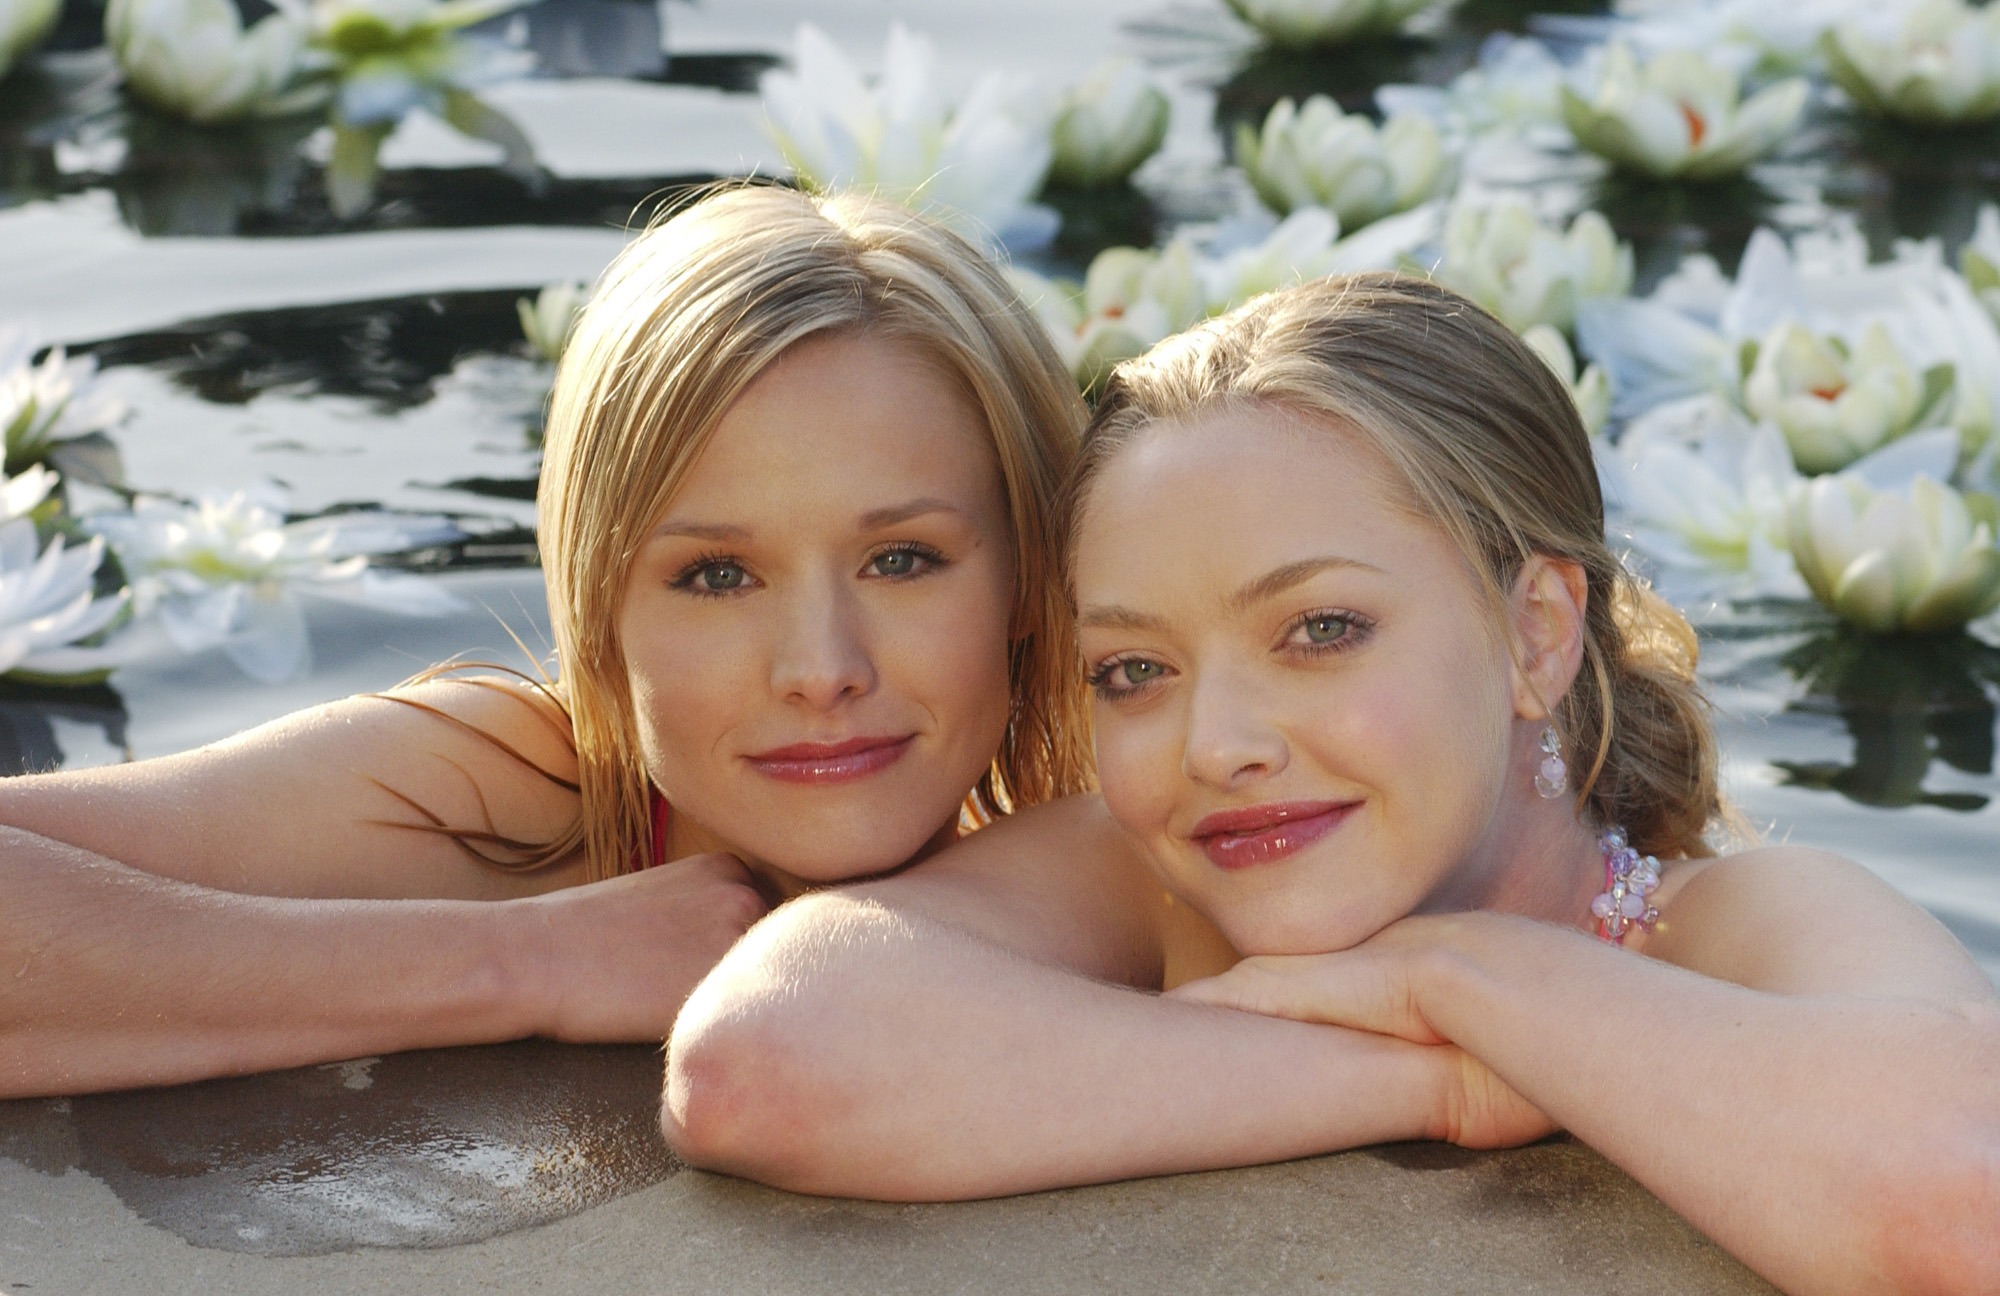 Amanda Seyfried and Kristen Bell, two celebrated actors, posing together